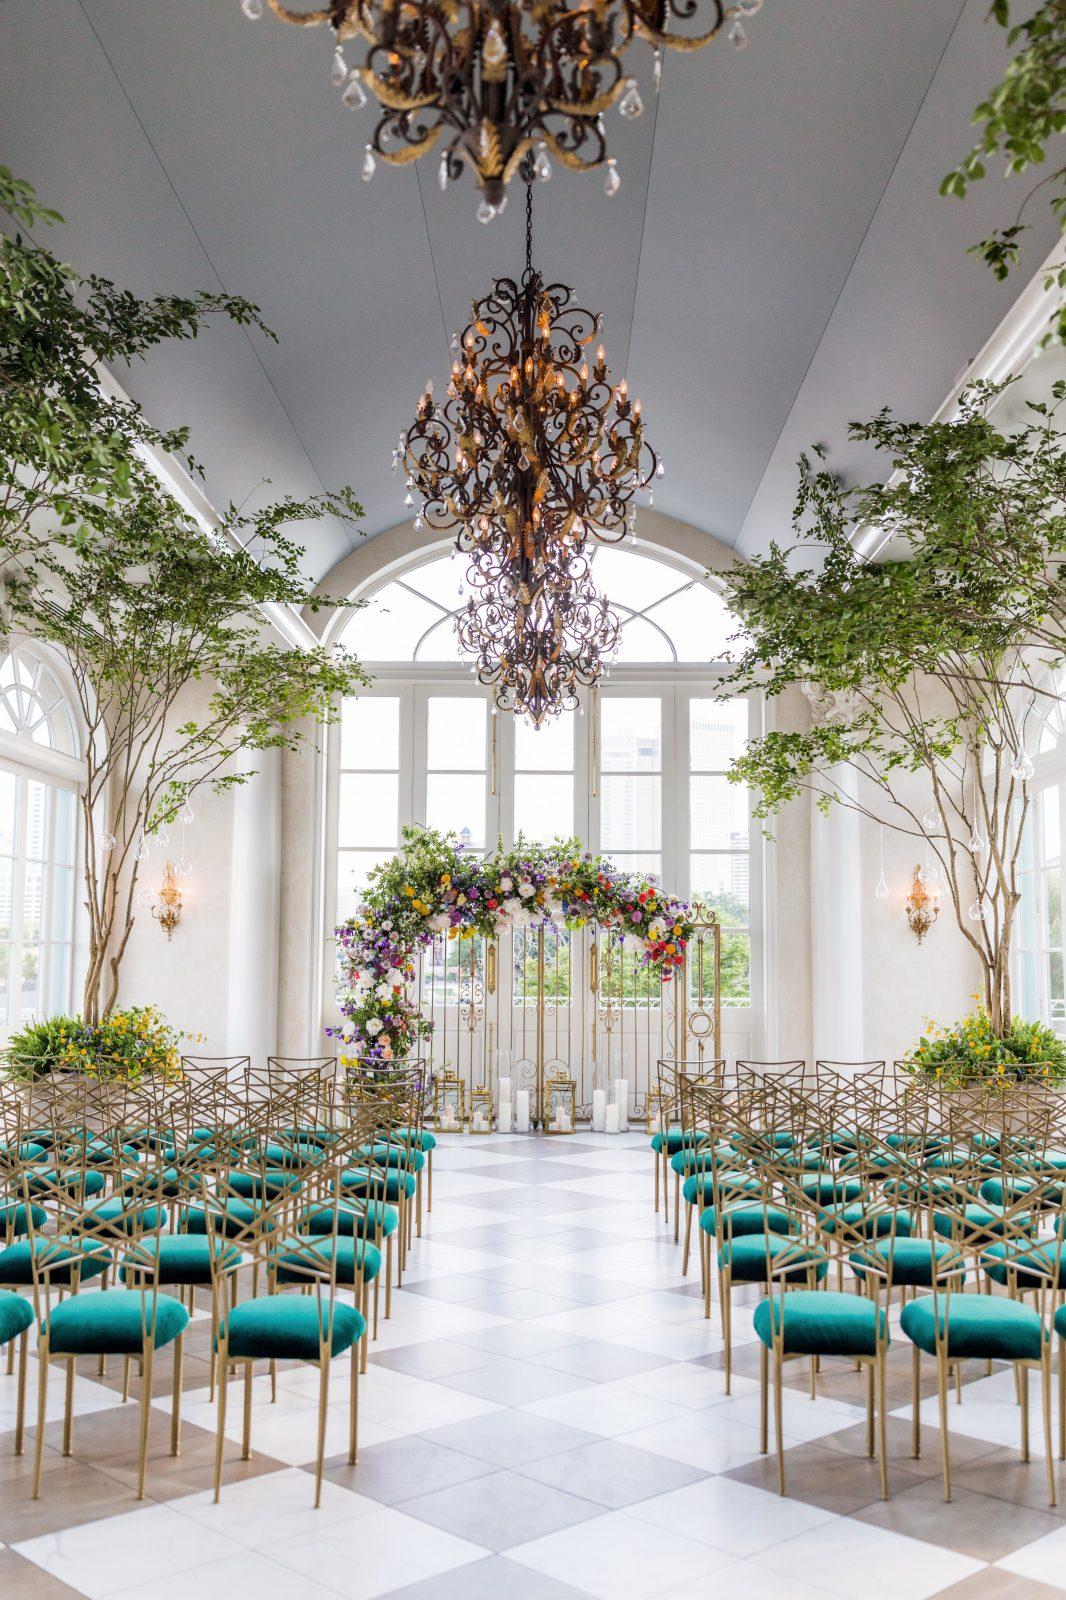 Wedding Ceremony set at Marche with True Value Rental Chameleon Chairs with green cushions. Photo by: Aislinn Kate Photography